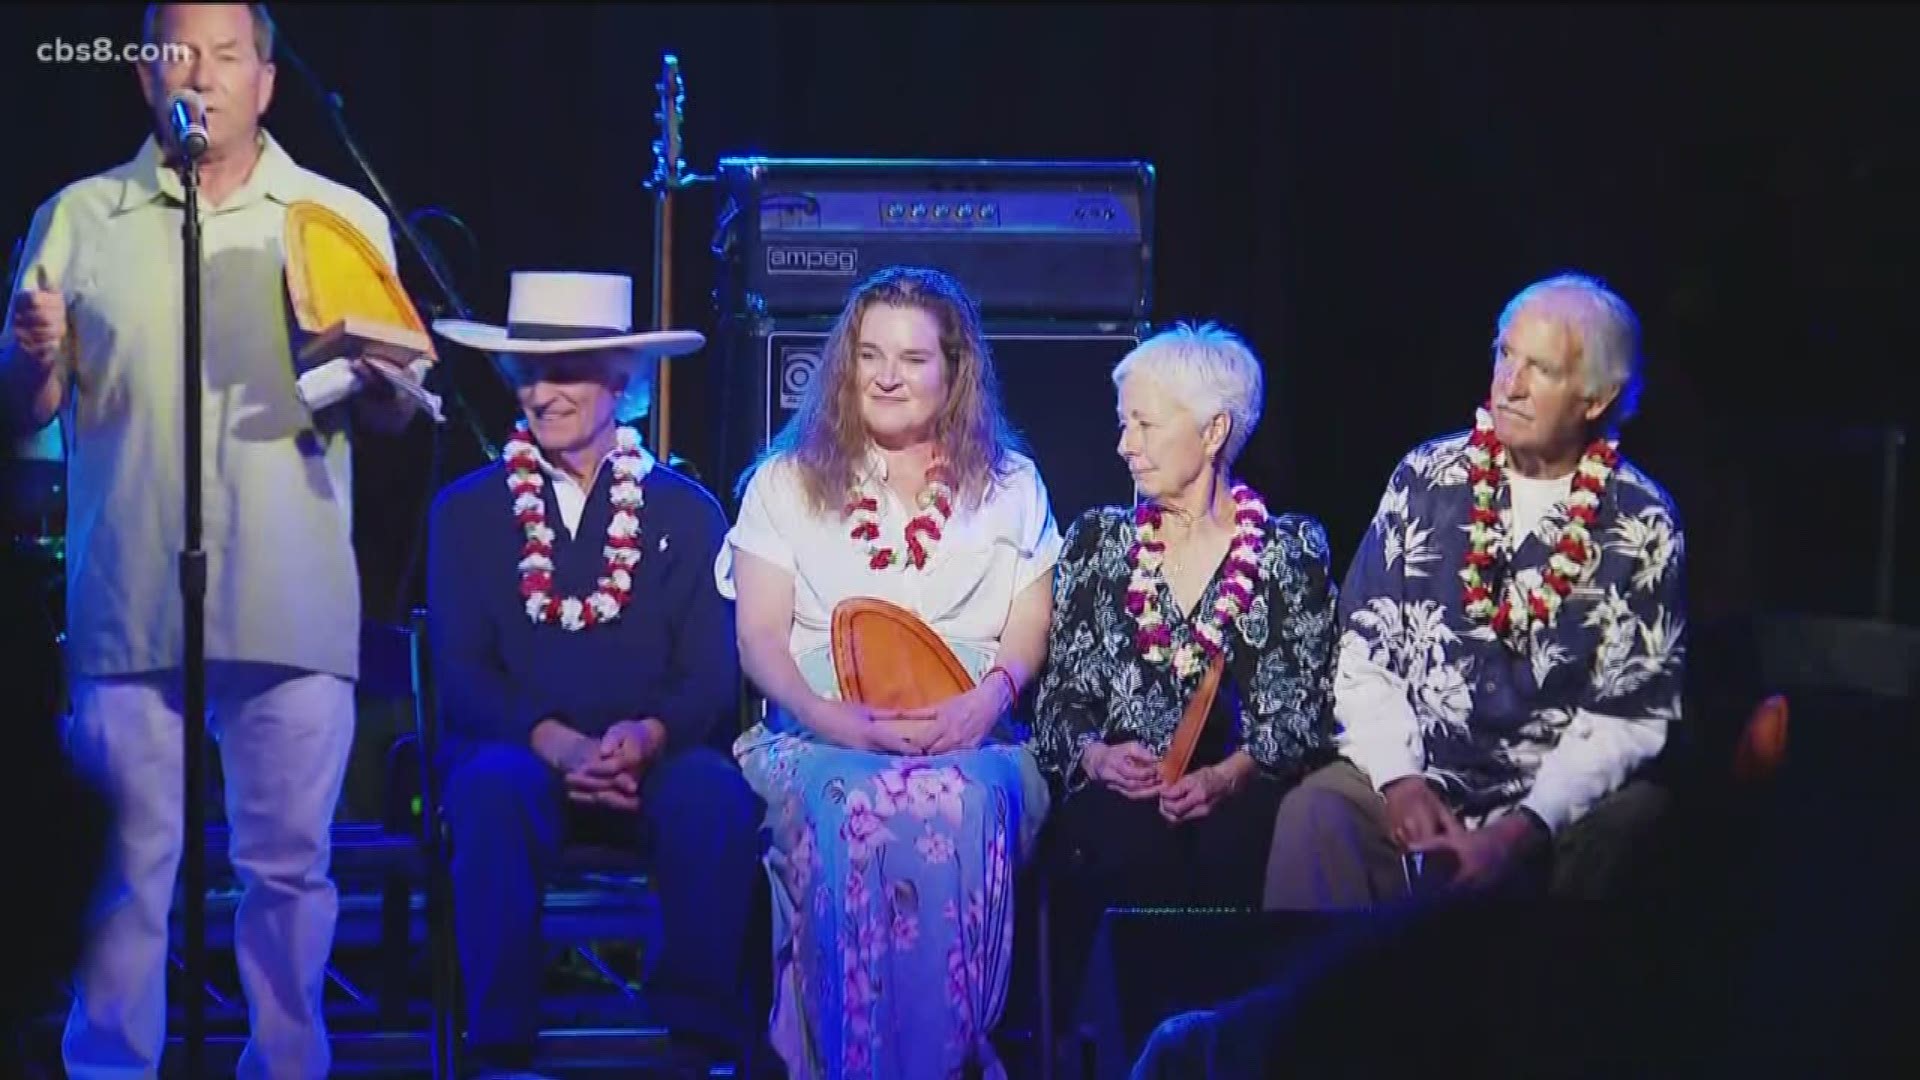 Fourteen surfing legends, including Mike Hyson, Carl Eksttrom and LJ Richards, were inducted into the San Diego Surfing Hall of Fame Tuesday night.